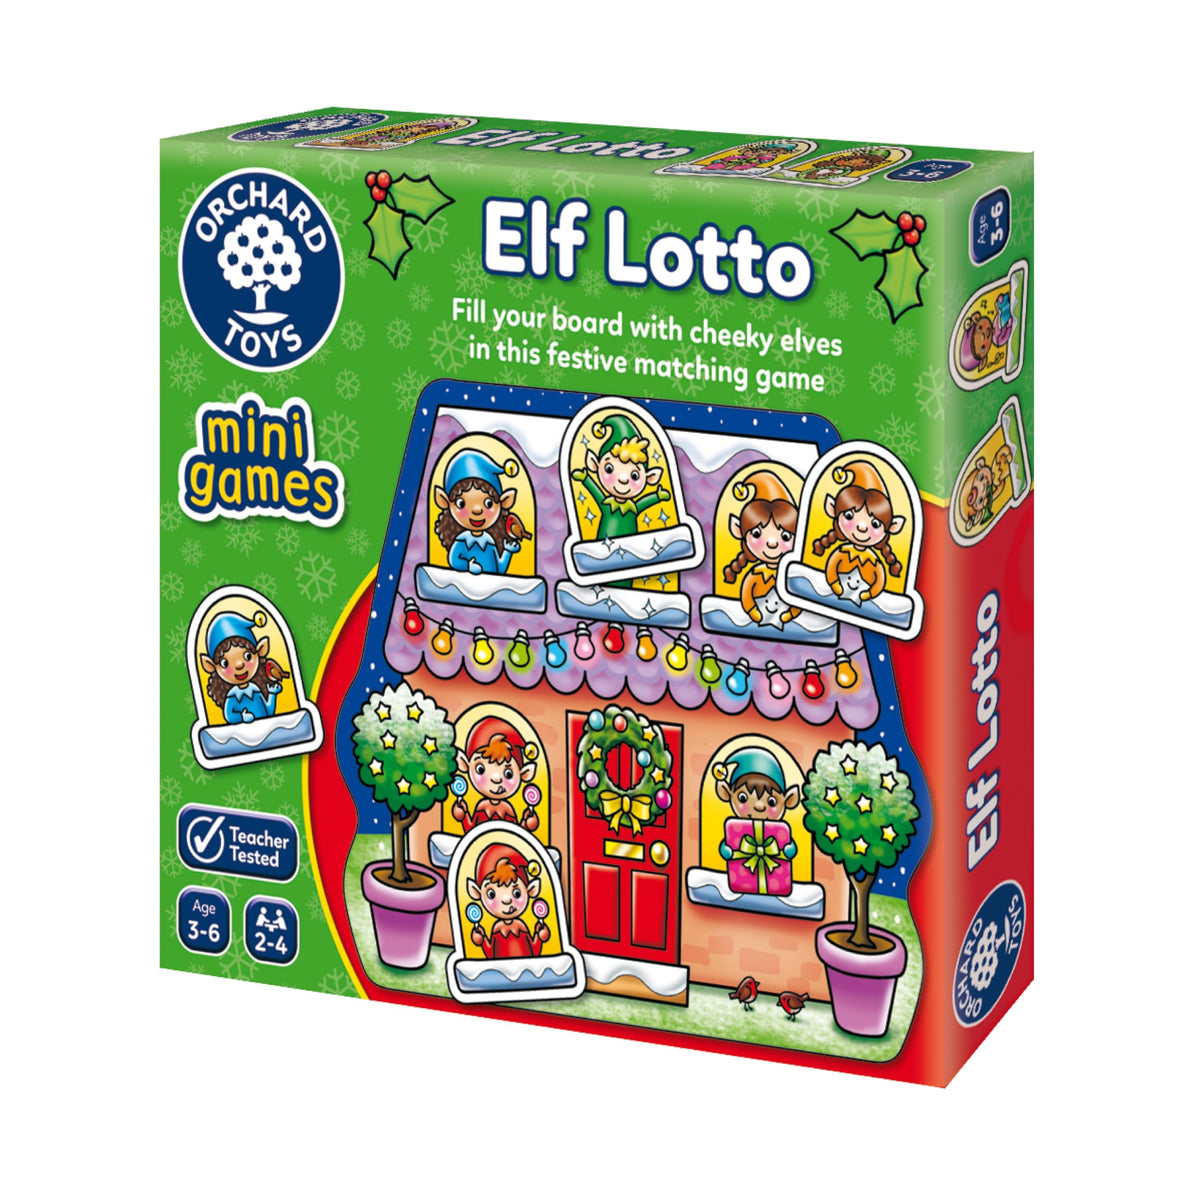 Orchard Toys Elf Lotto